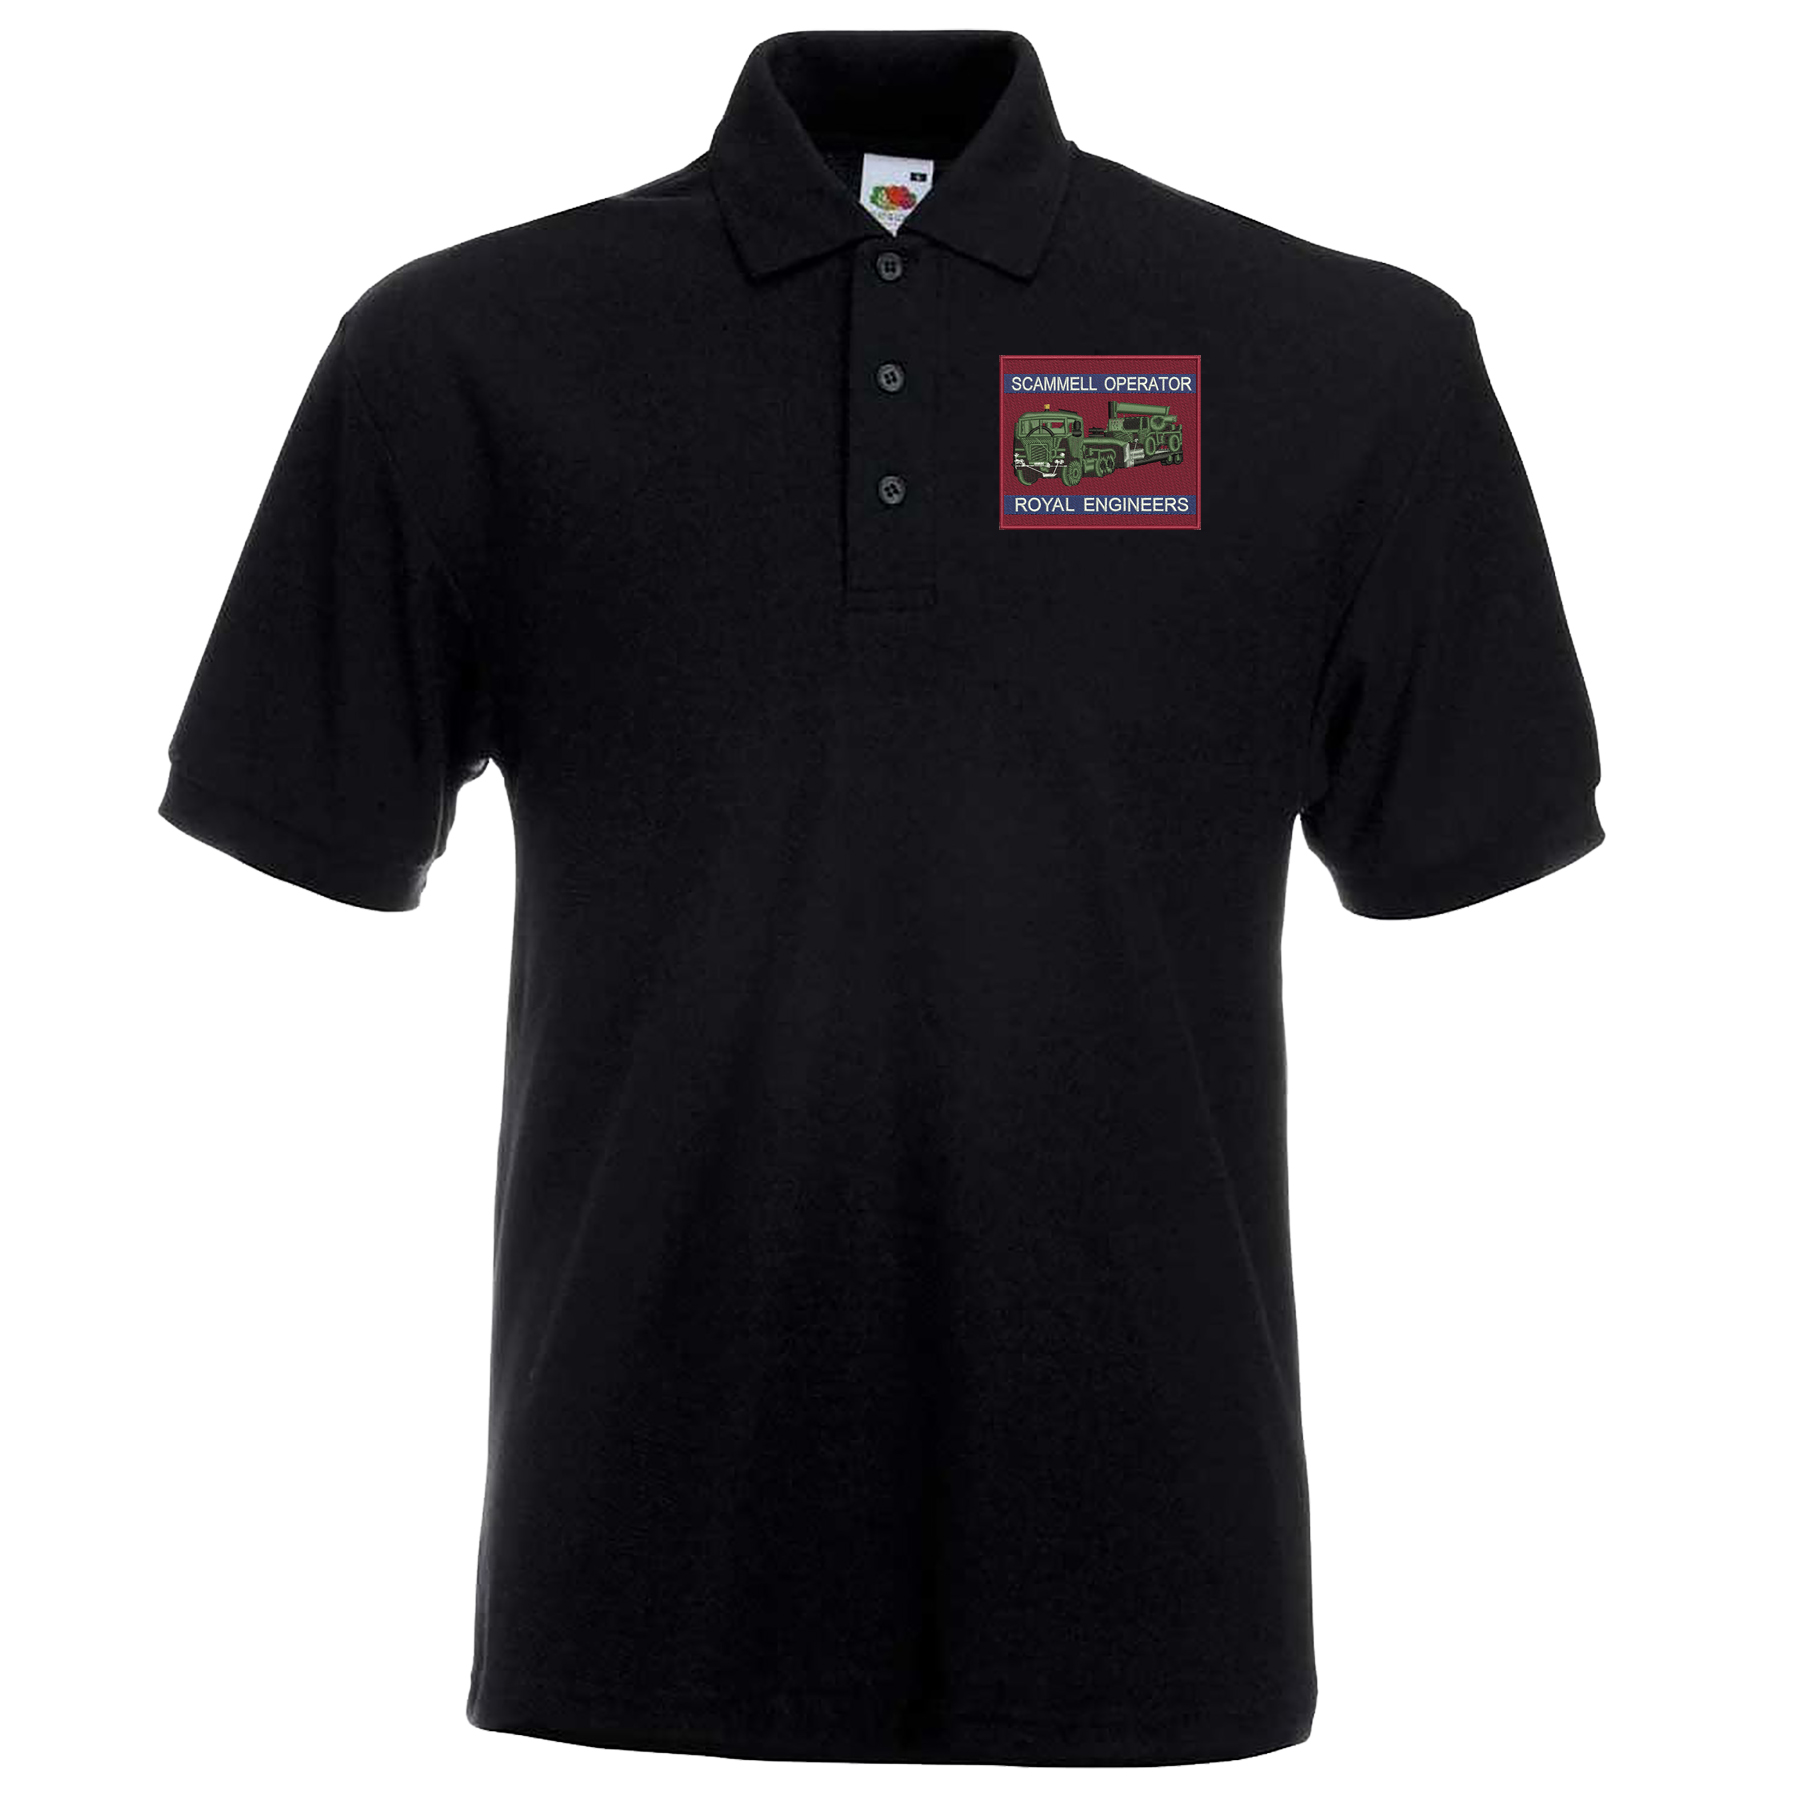 Scammell Operator Embroidered polo shirt SMALL BLK